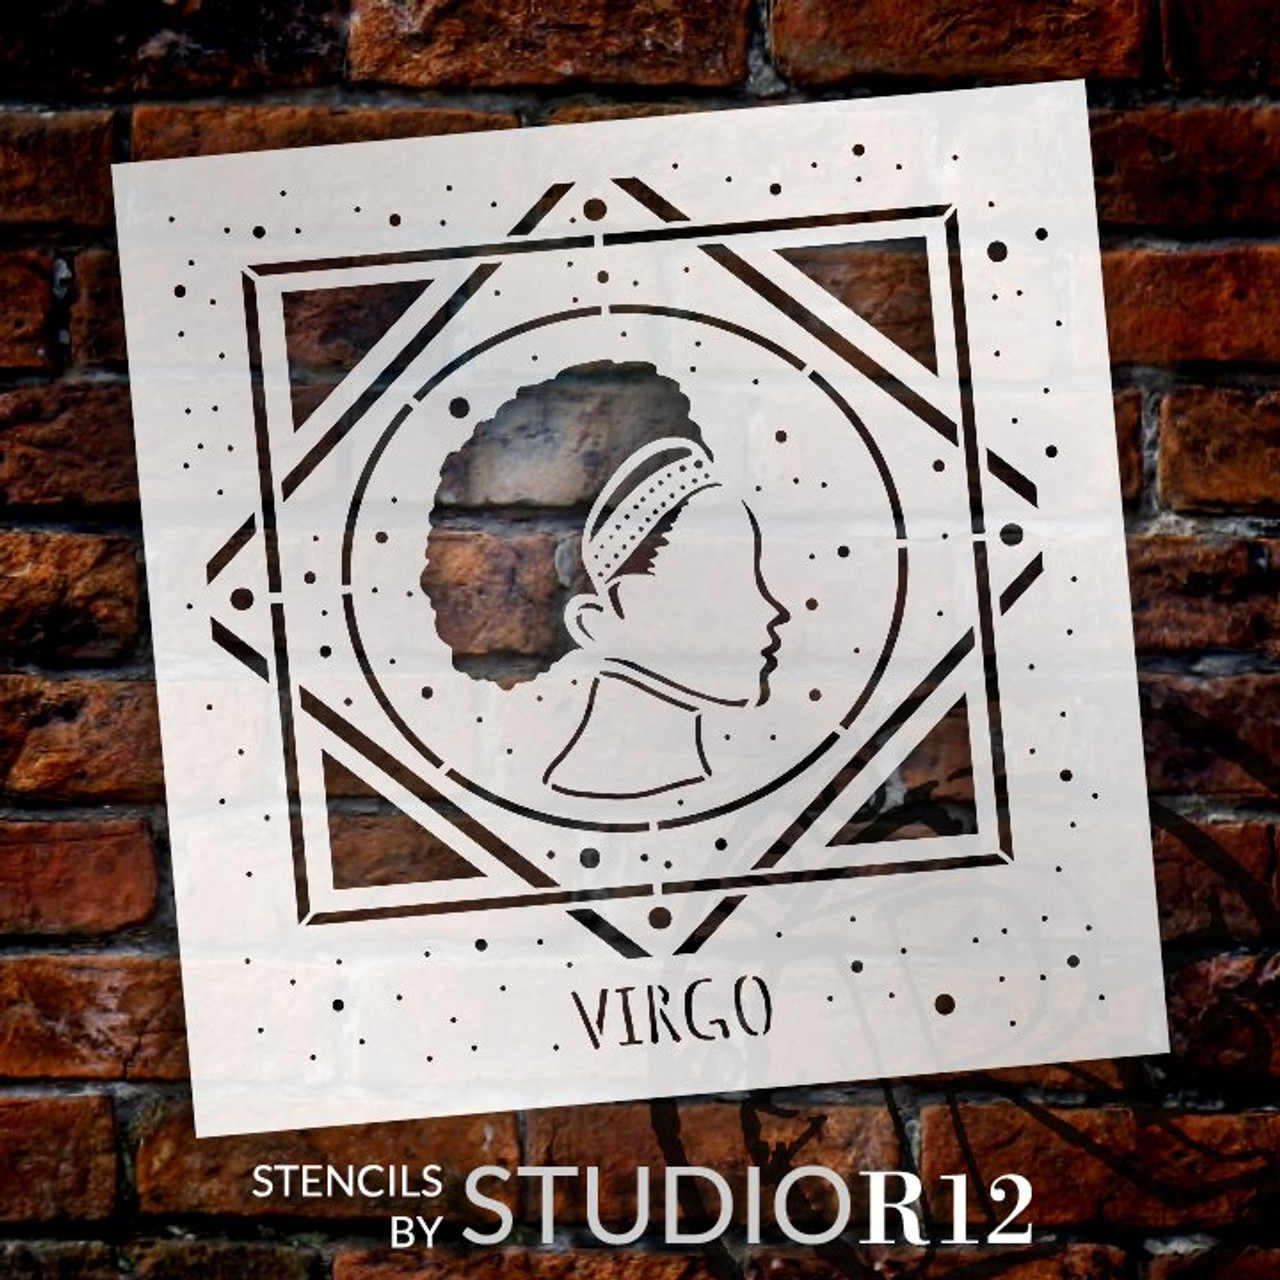 Virgo Zodiac Stencil by StudioR12 | DIY Star Sign Celestial Bedroom & Home Decor | Craft & Paint Astrological Wood Signs | Select Size